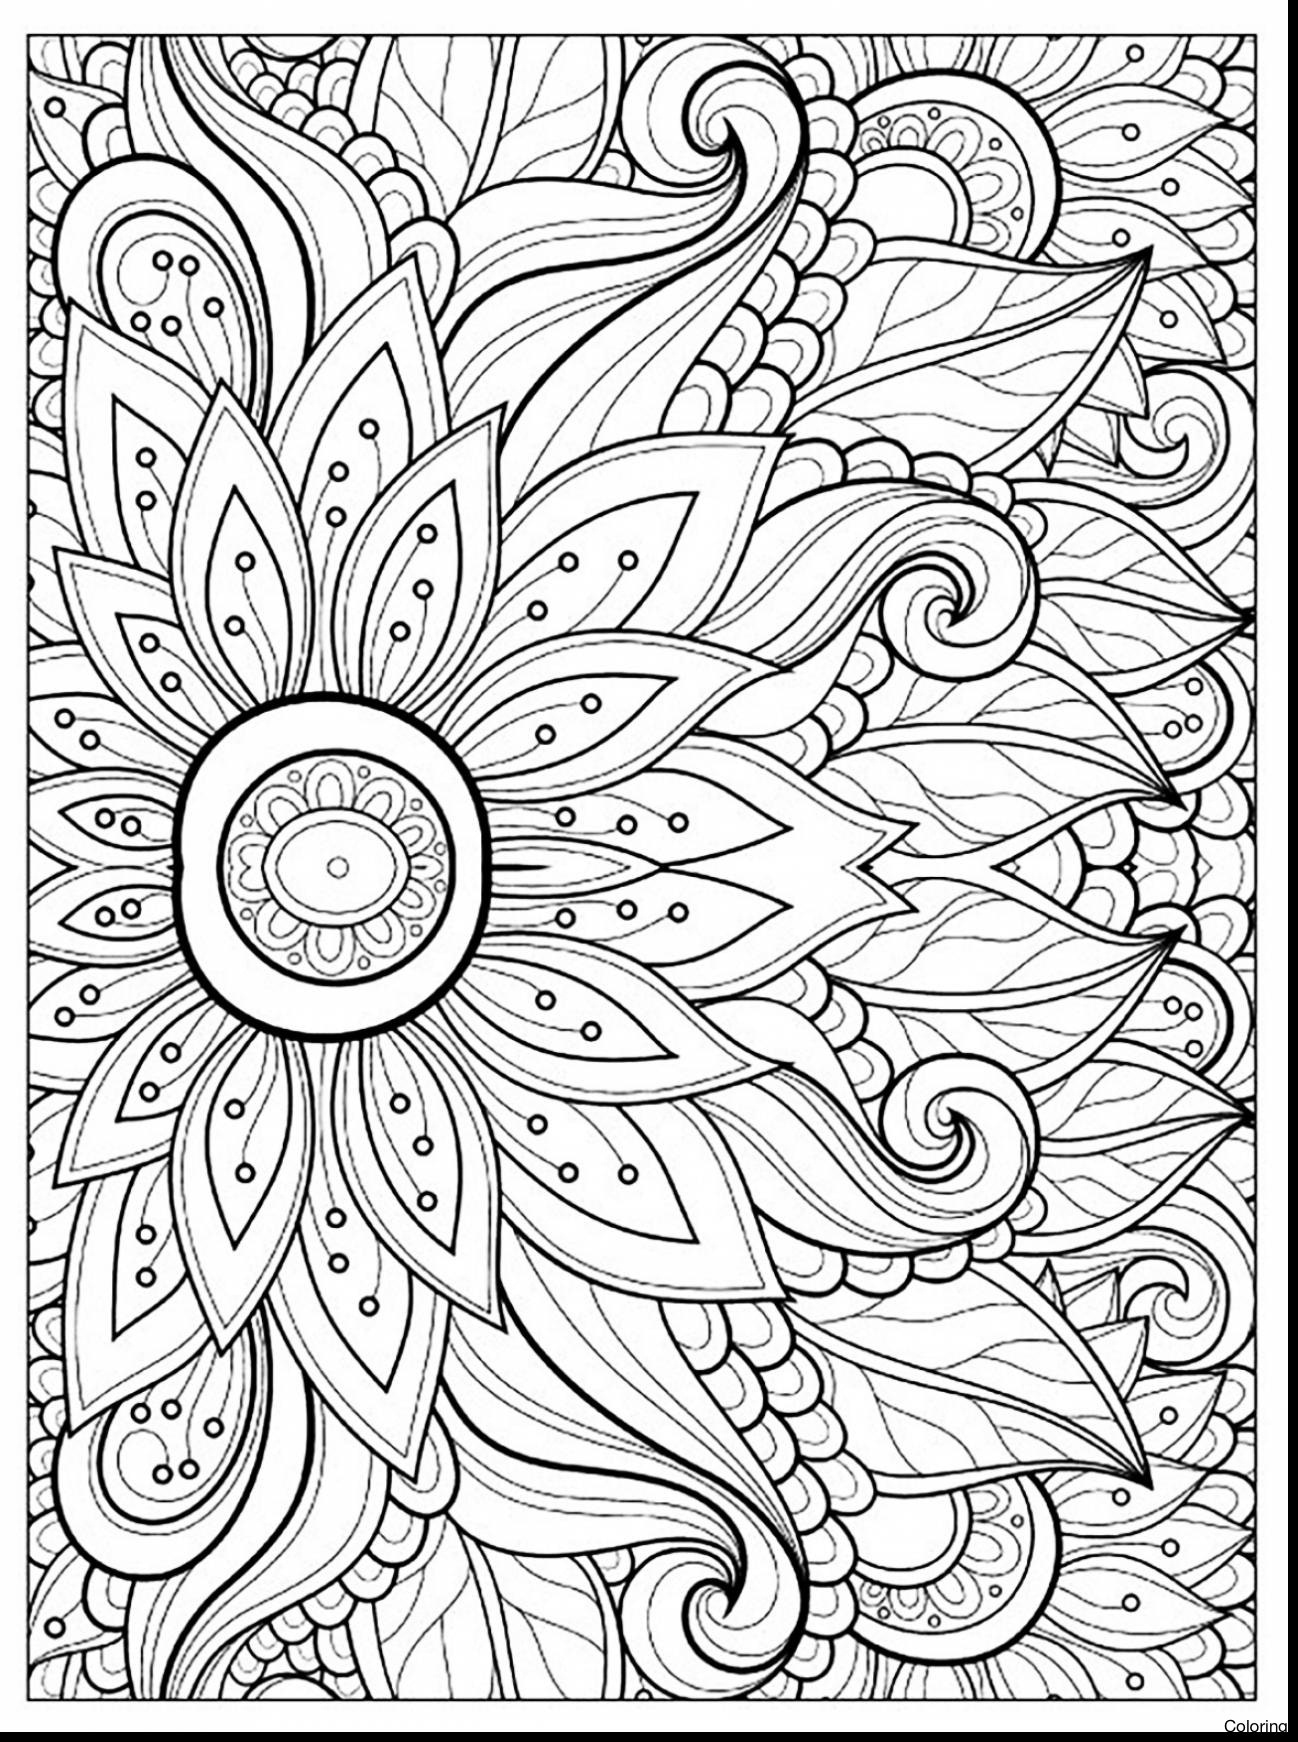 Coloring Ideas : Awesome Free Printable Holiday Adult Coloring Pages - Free Printable Coloring Pages For Adults Pdf